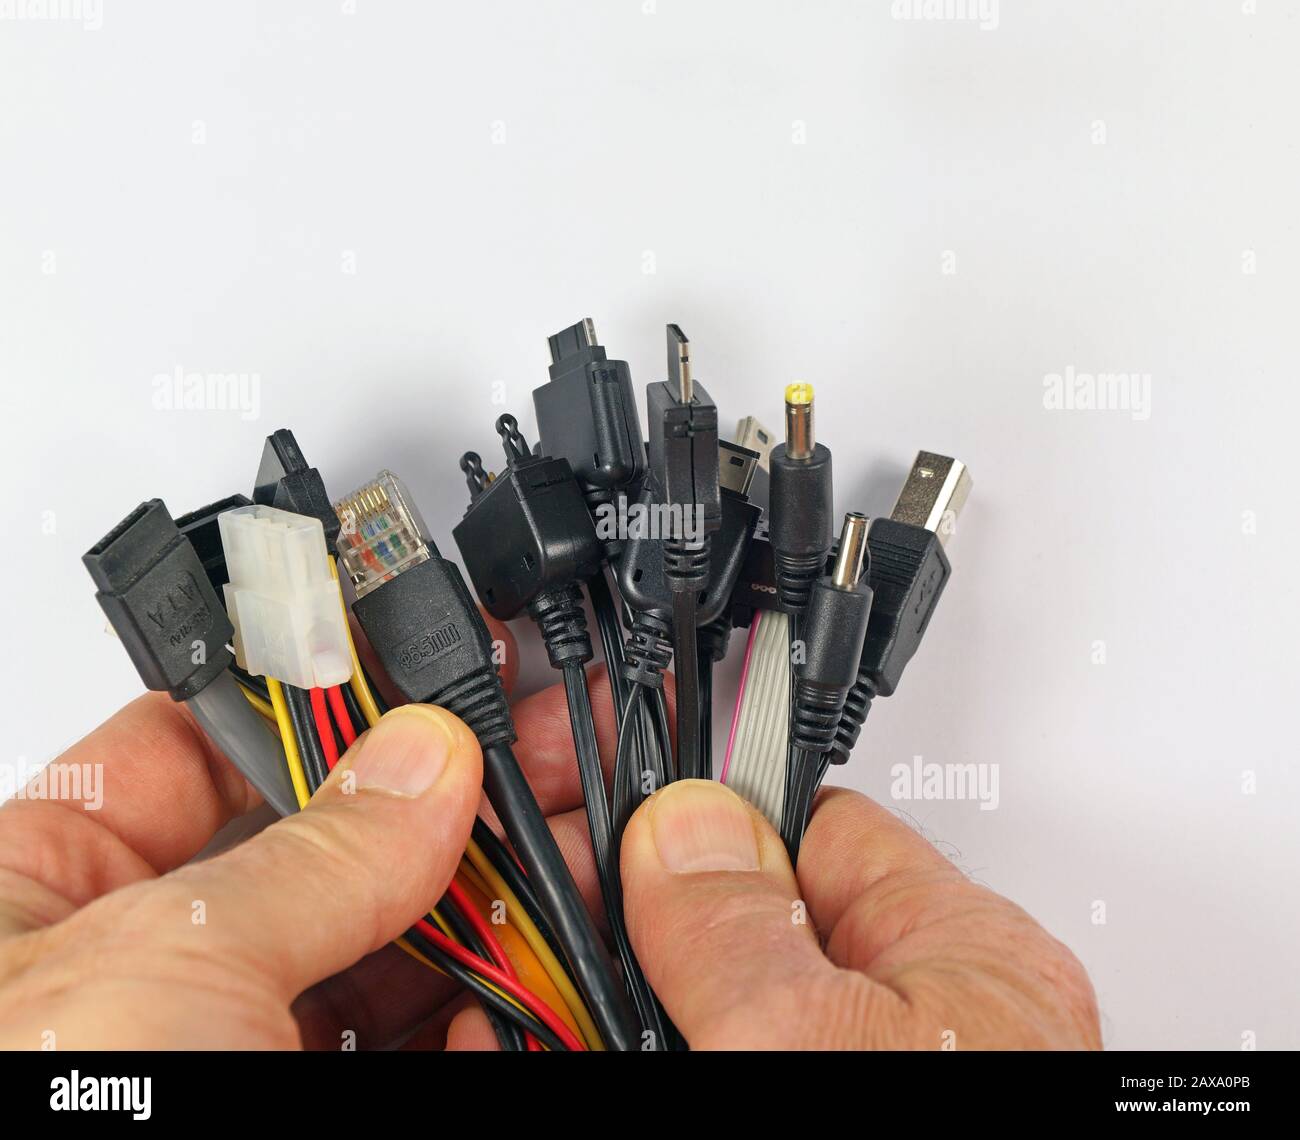 The man holds a dozen or so various plugs for electronic devices in his hands. Stock Photo